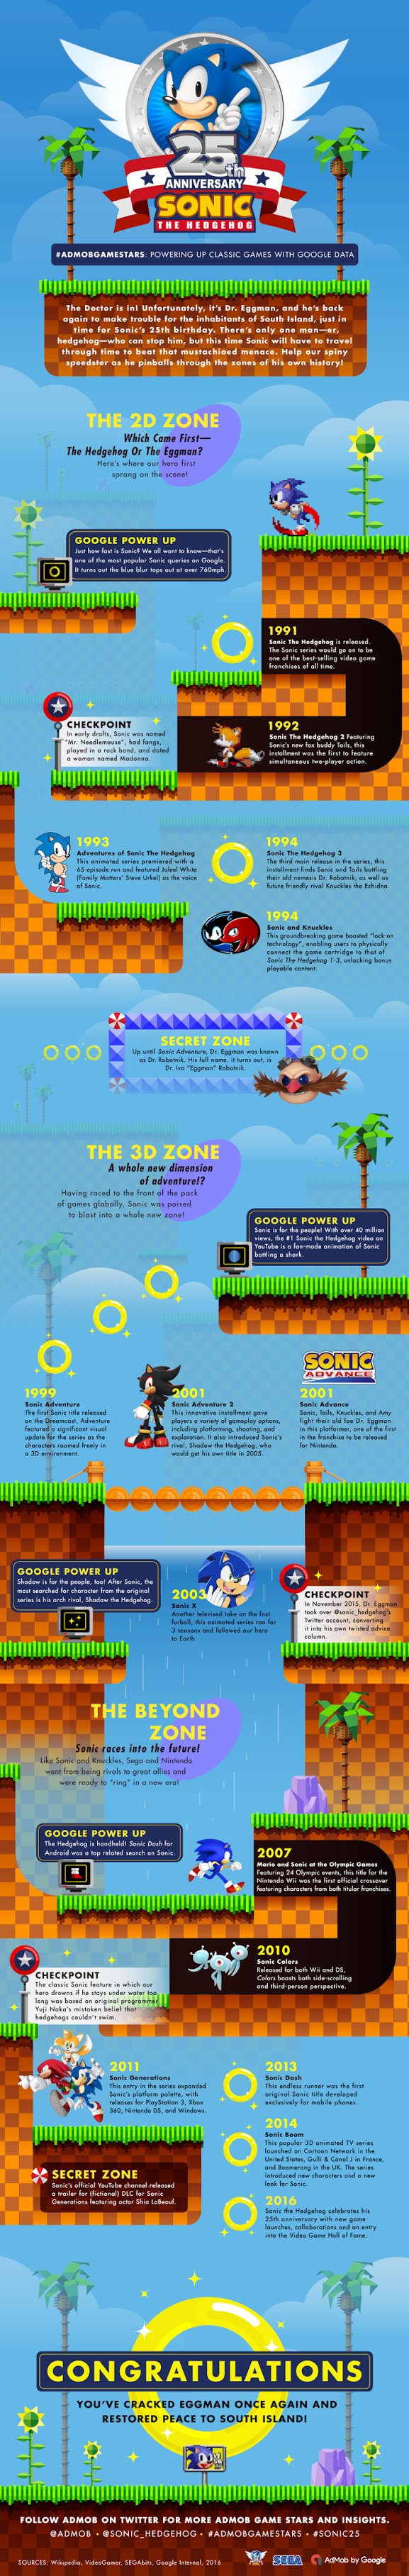 sonic_20th_infographic